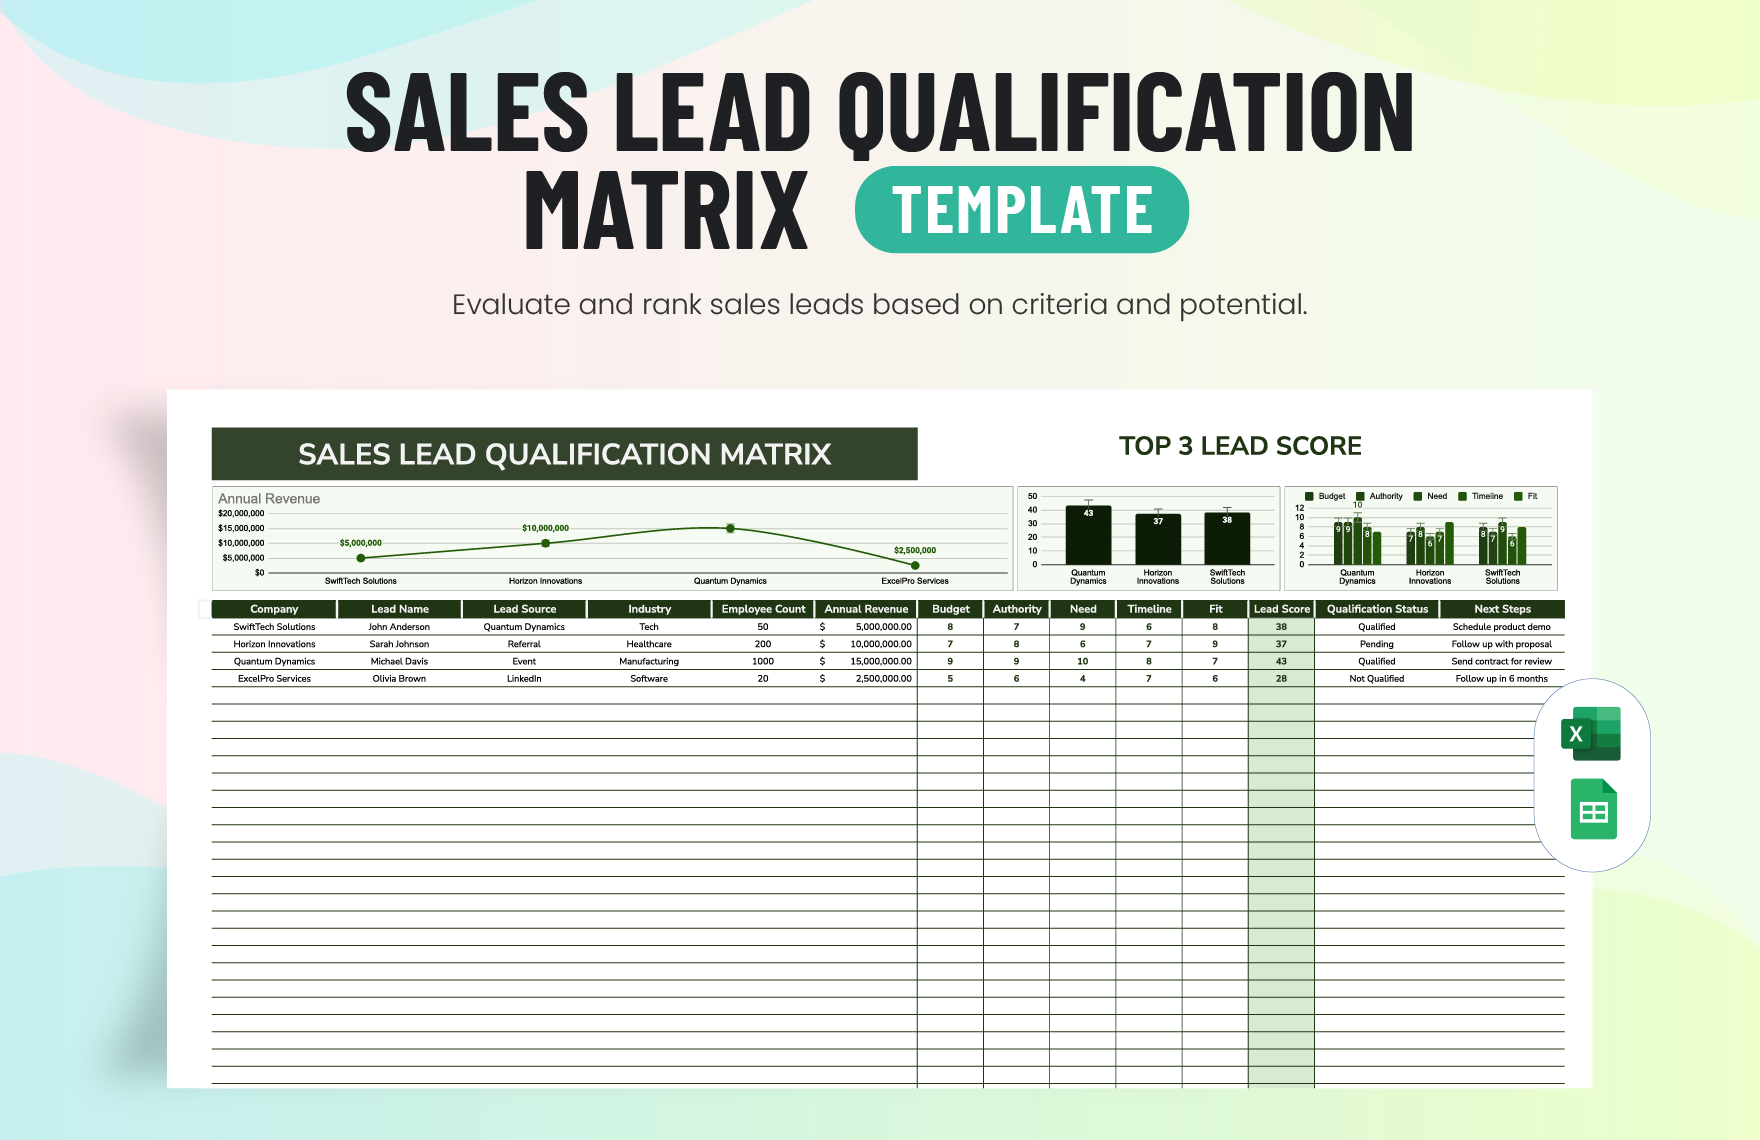 Sales Lead Qualification Matrix Template in Excel, Google Sheets